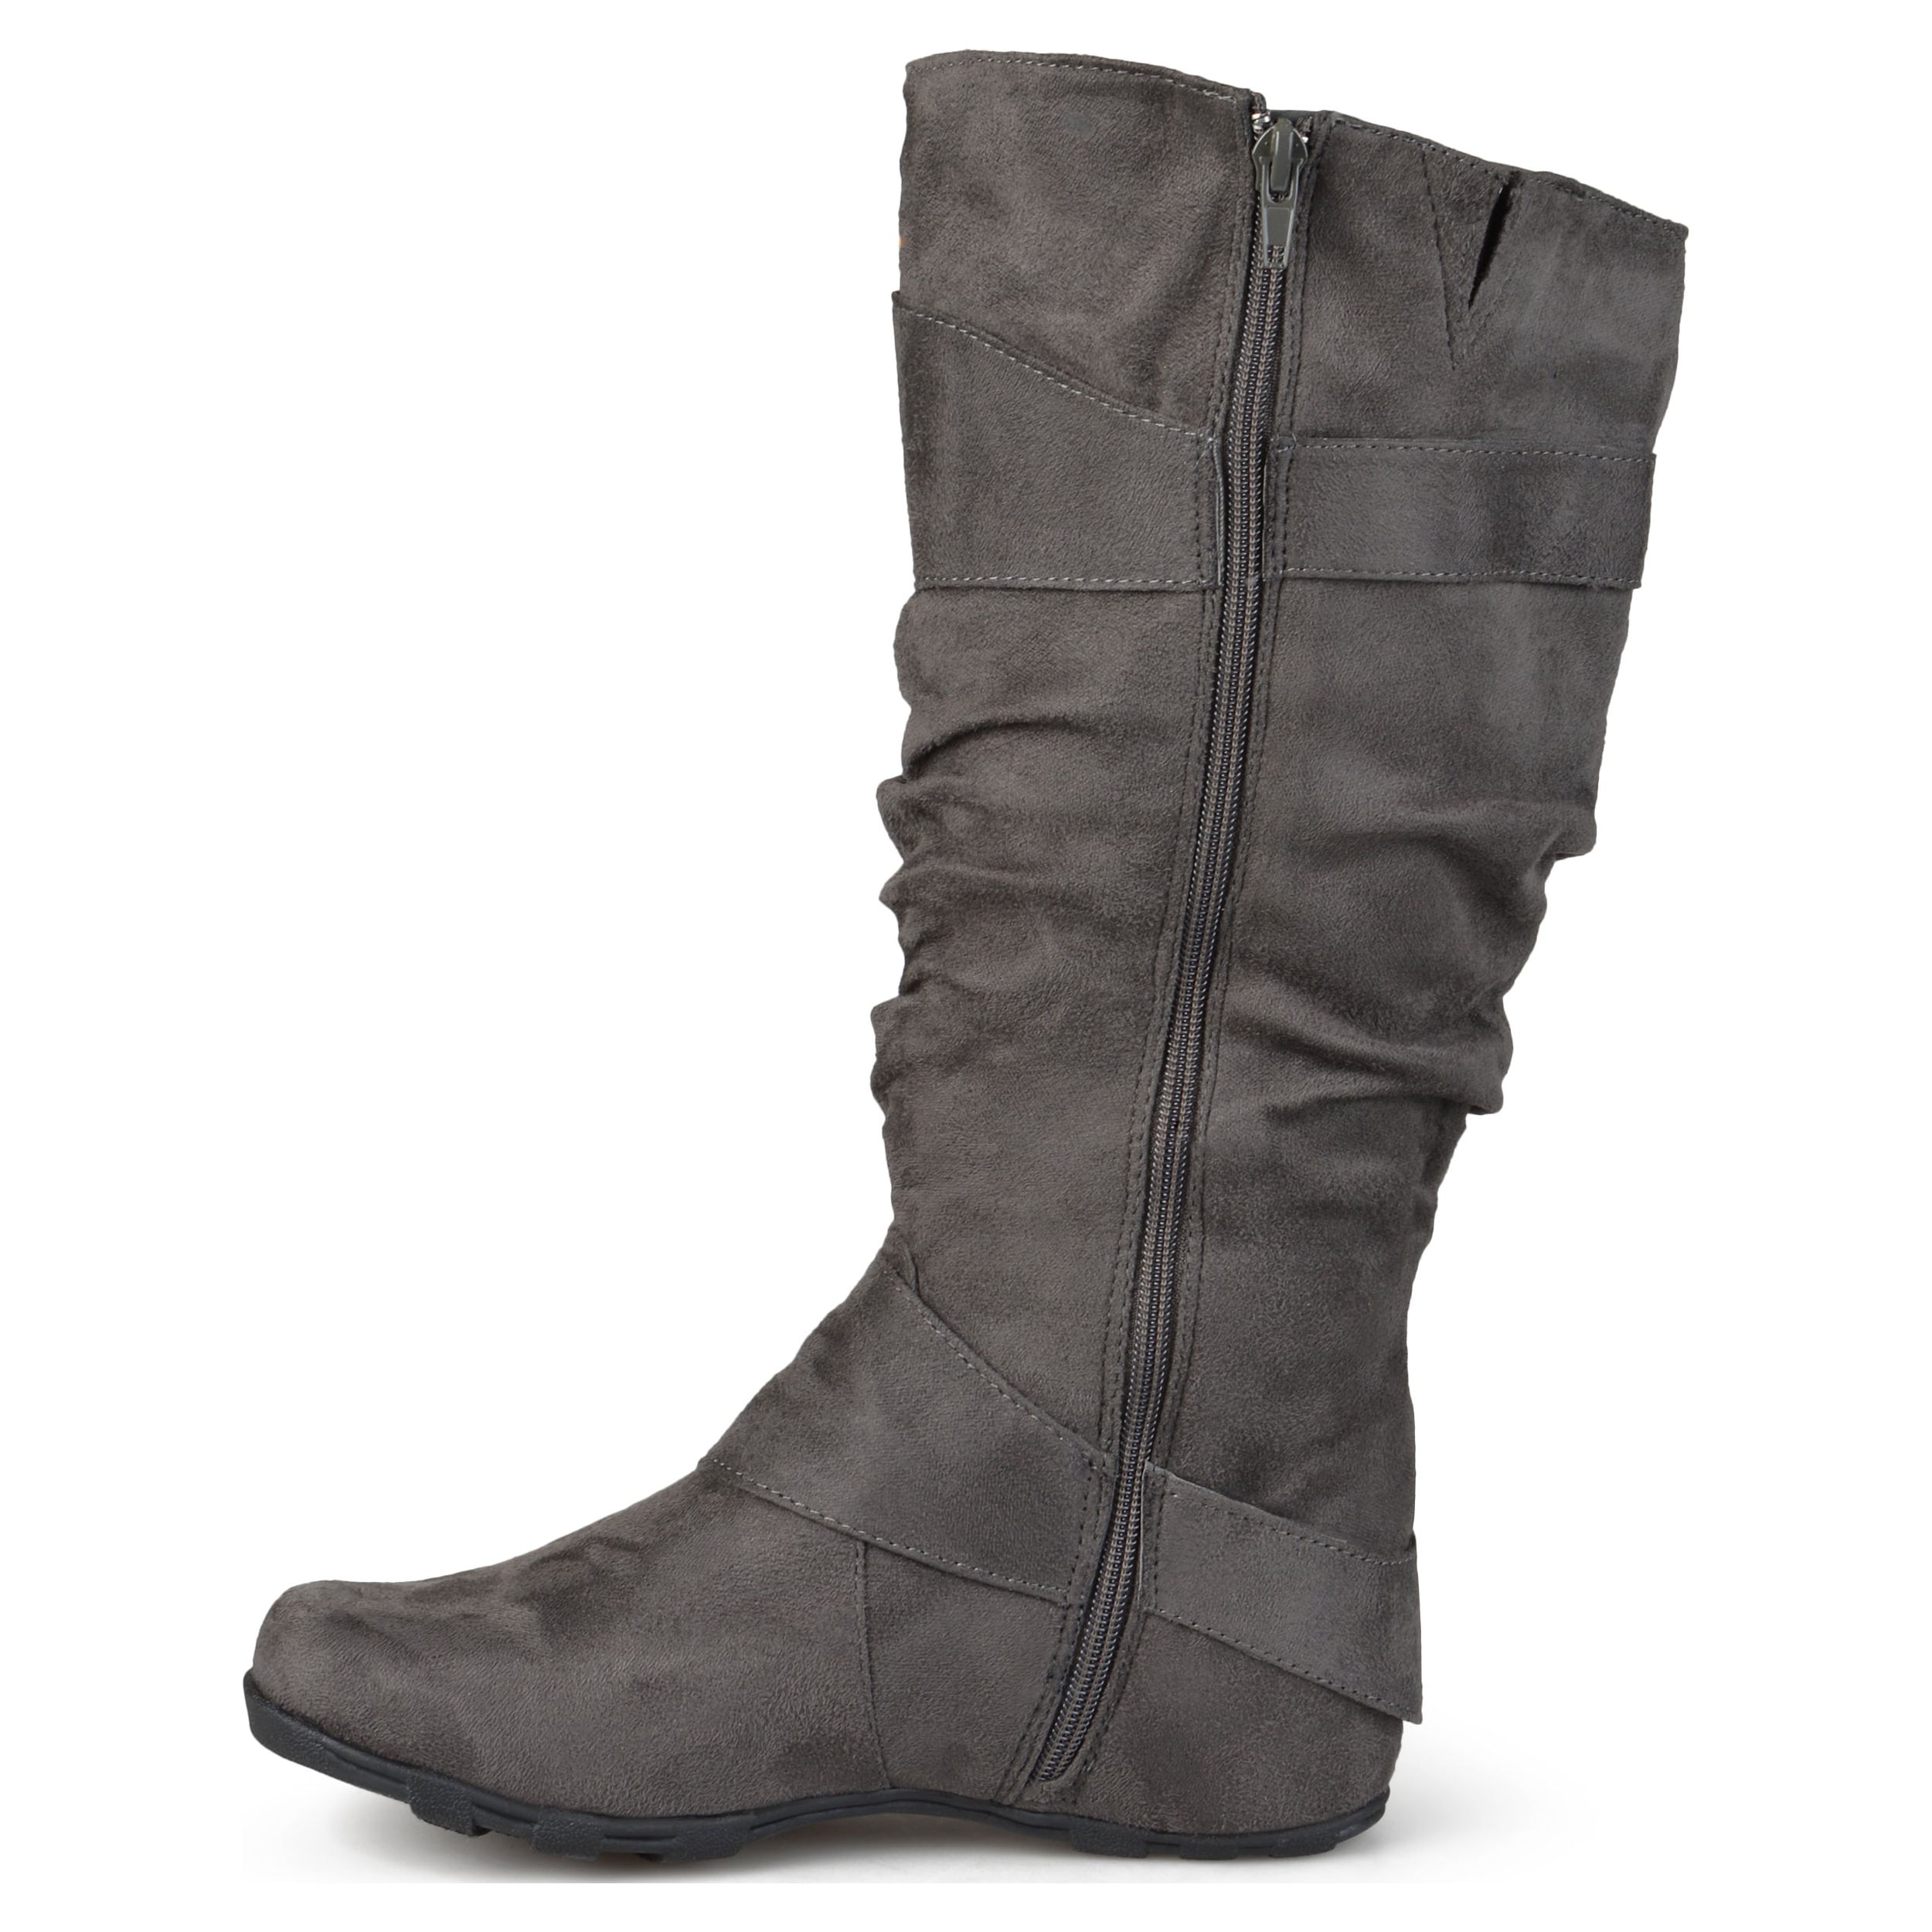 Women's Slouchy Wide Calf Boots - image 3 of 8